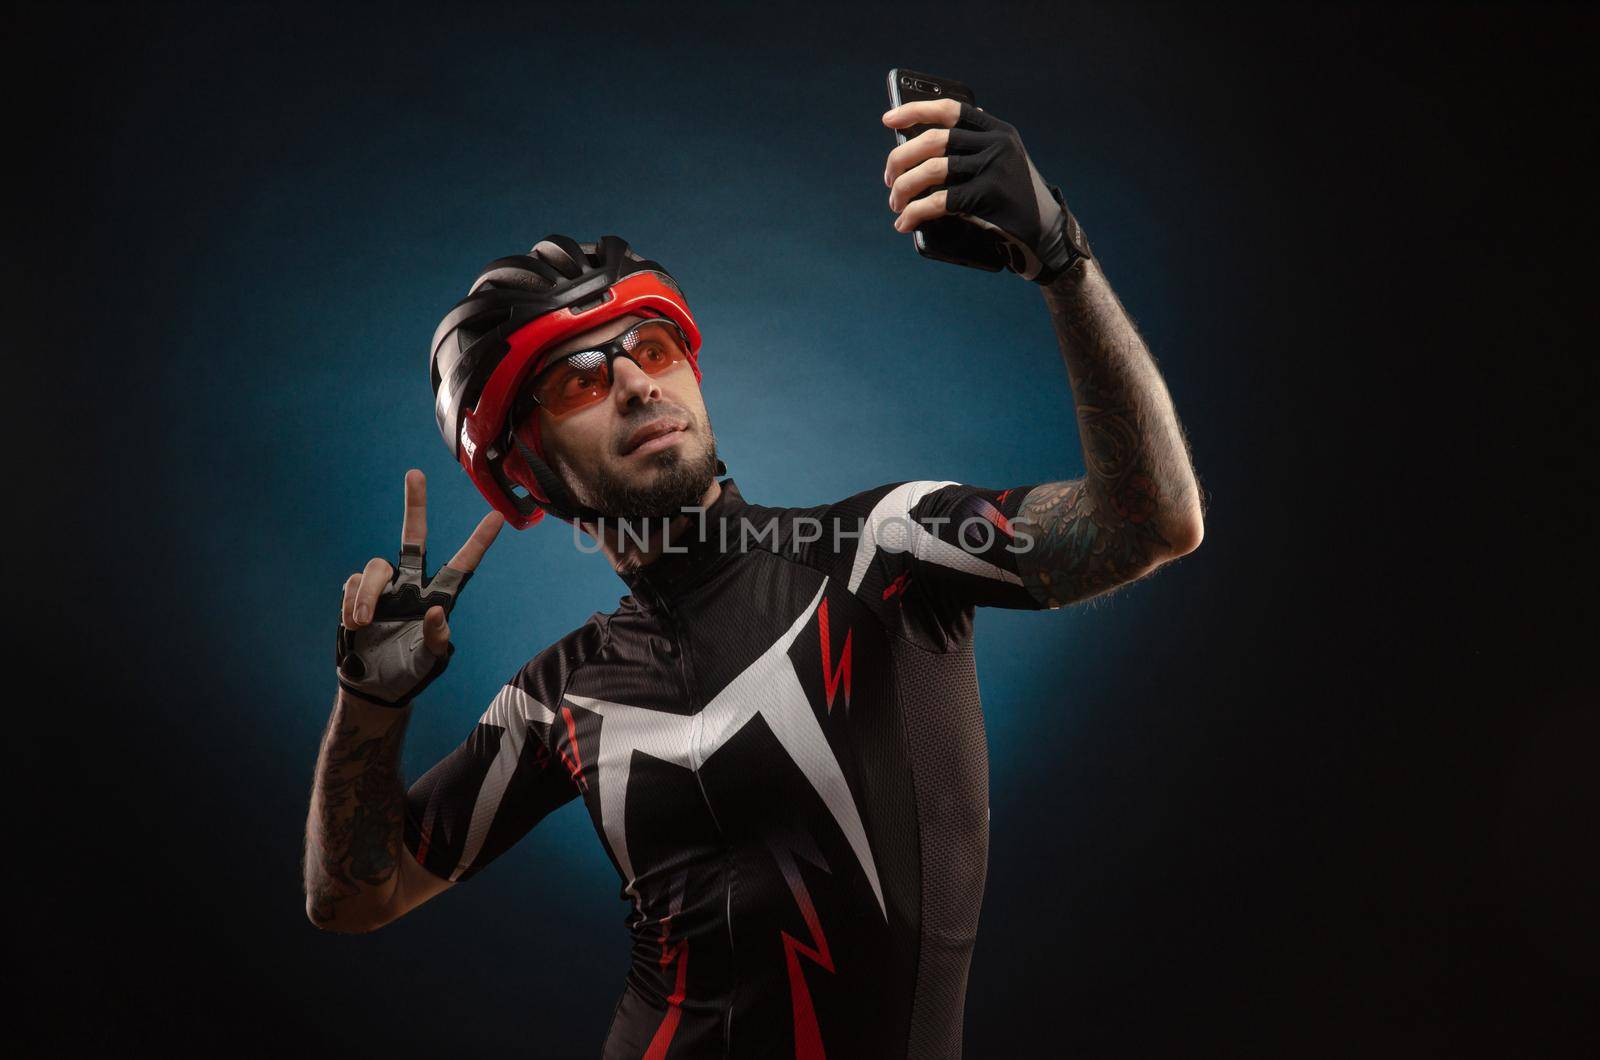 guy is a cyclist in a Bicycle helmet takes a selfie by Rotozey